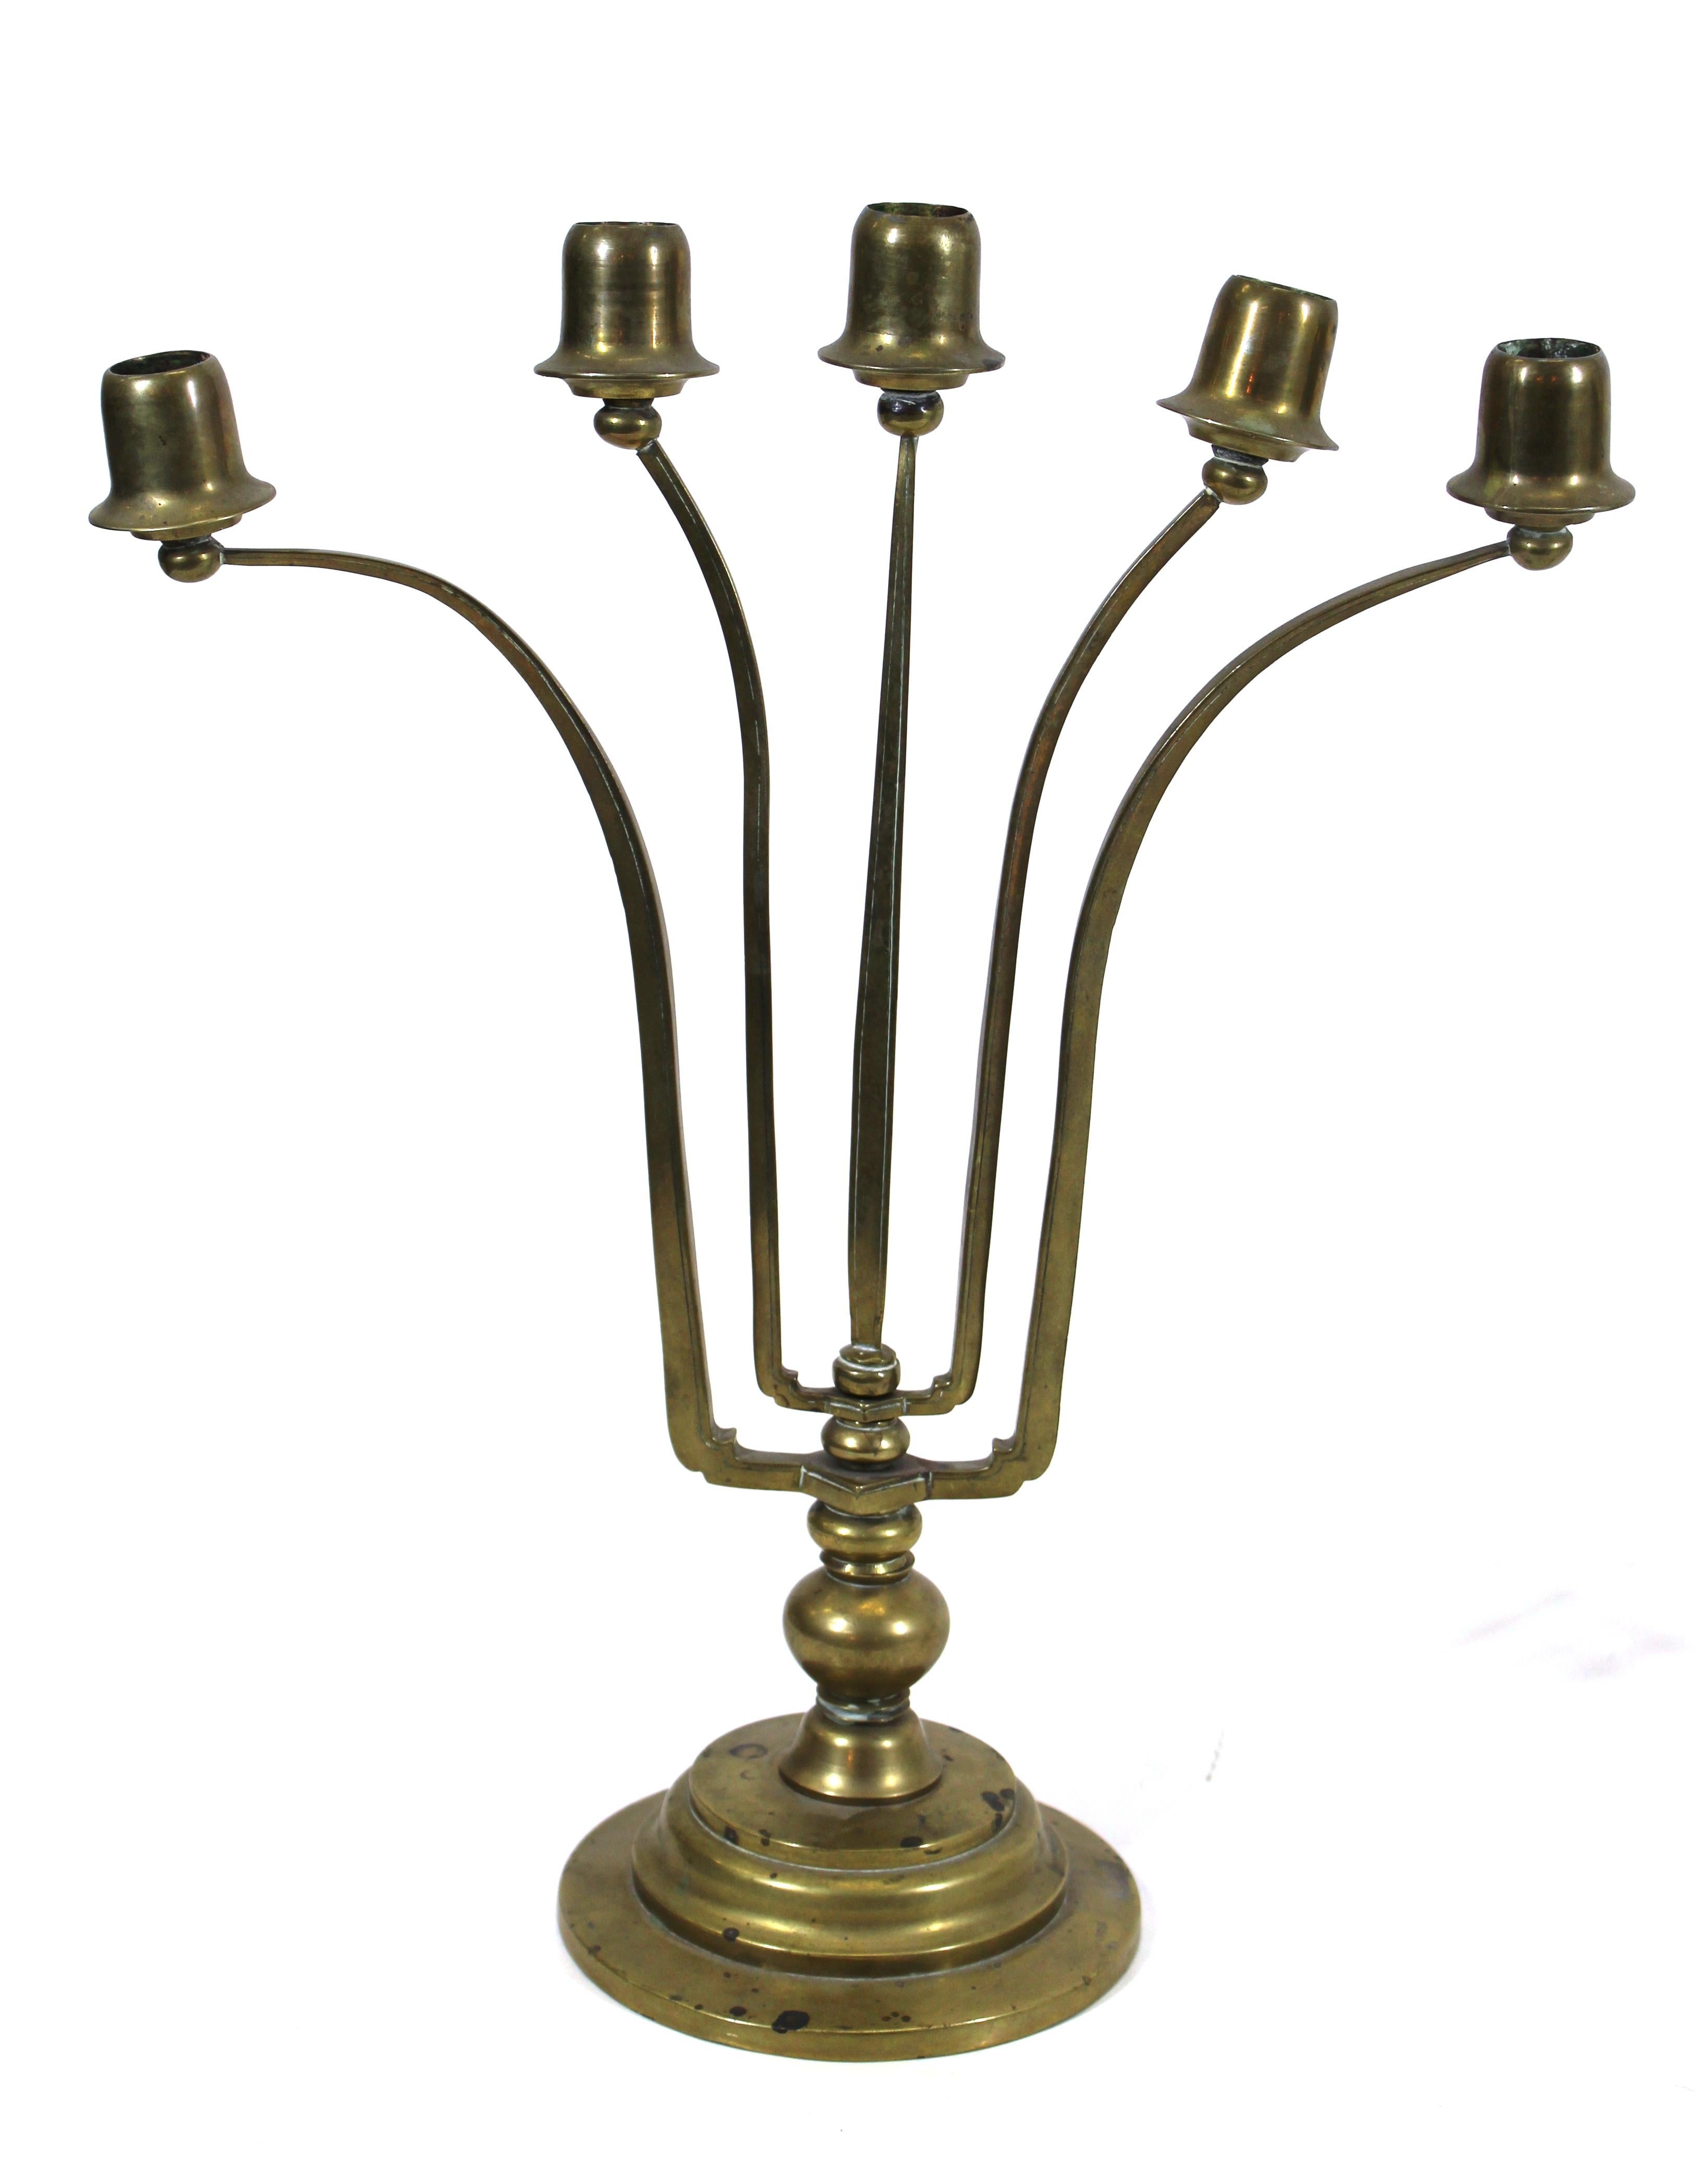 German early Modernist pair of candleholders in the style of Peter Behrens, circa 1900, unmarked.